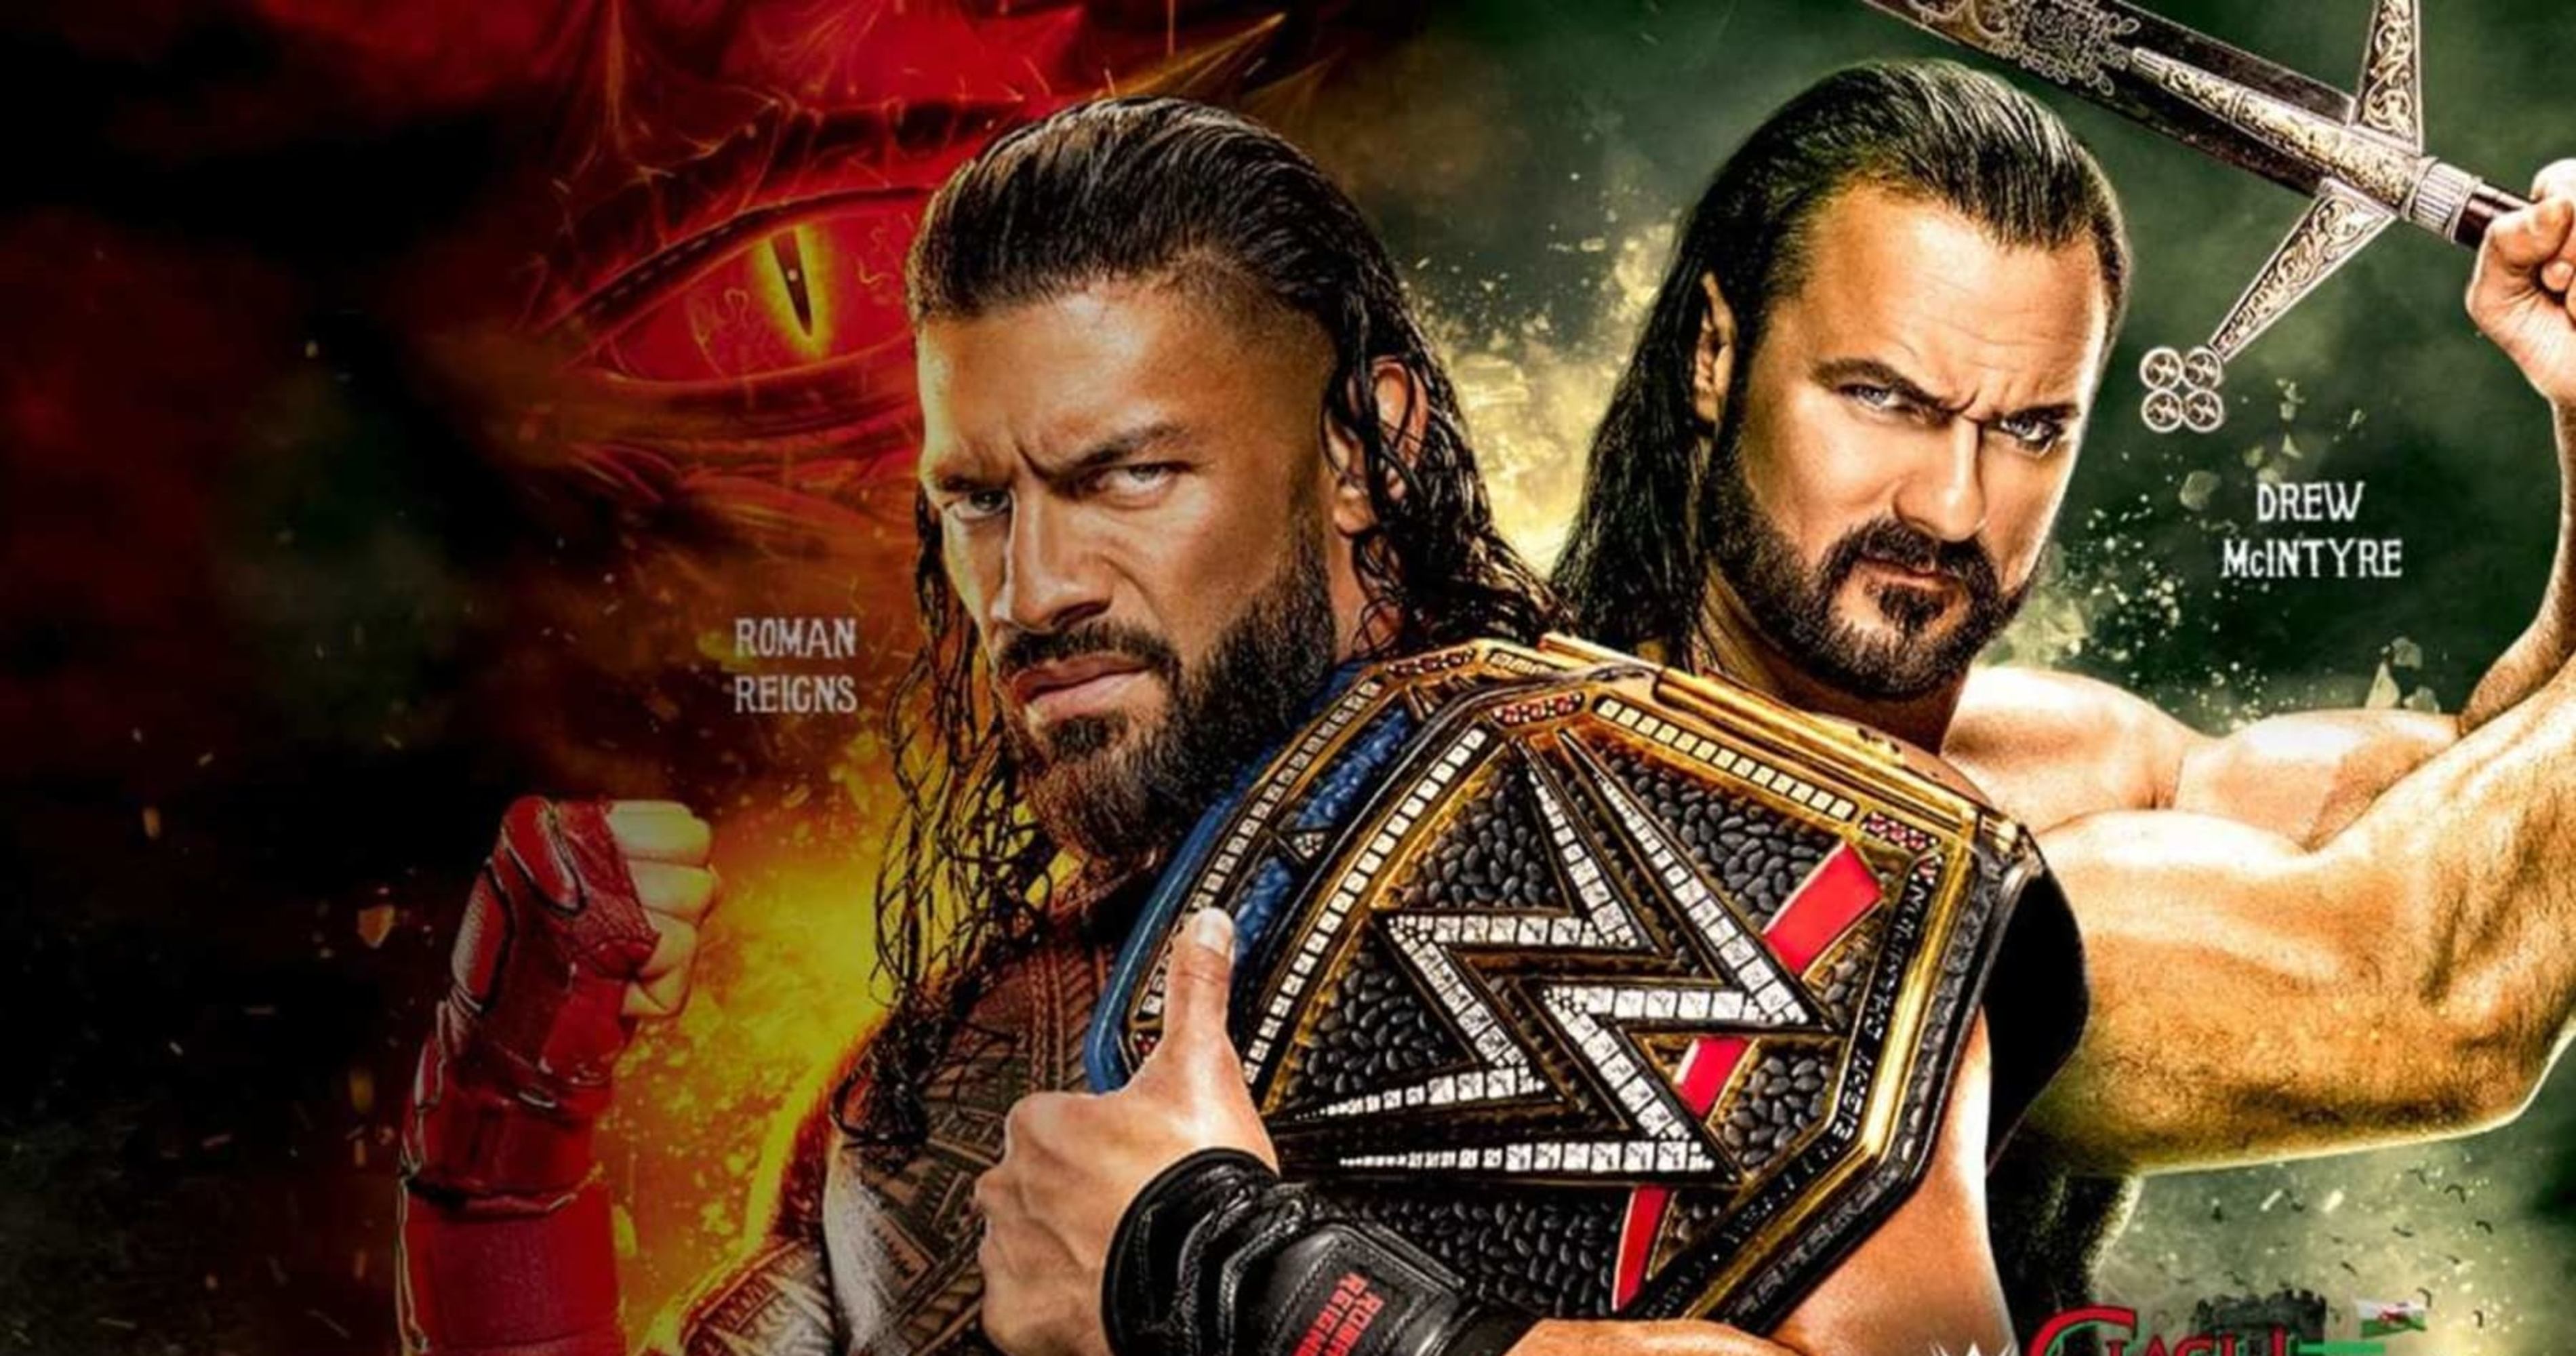 Updated WWE Clash at the Castle 2022 Match Card and Bold Predictions